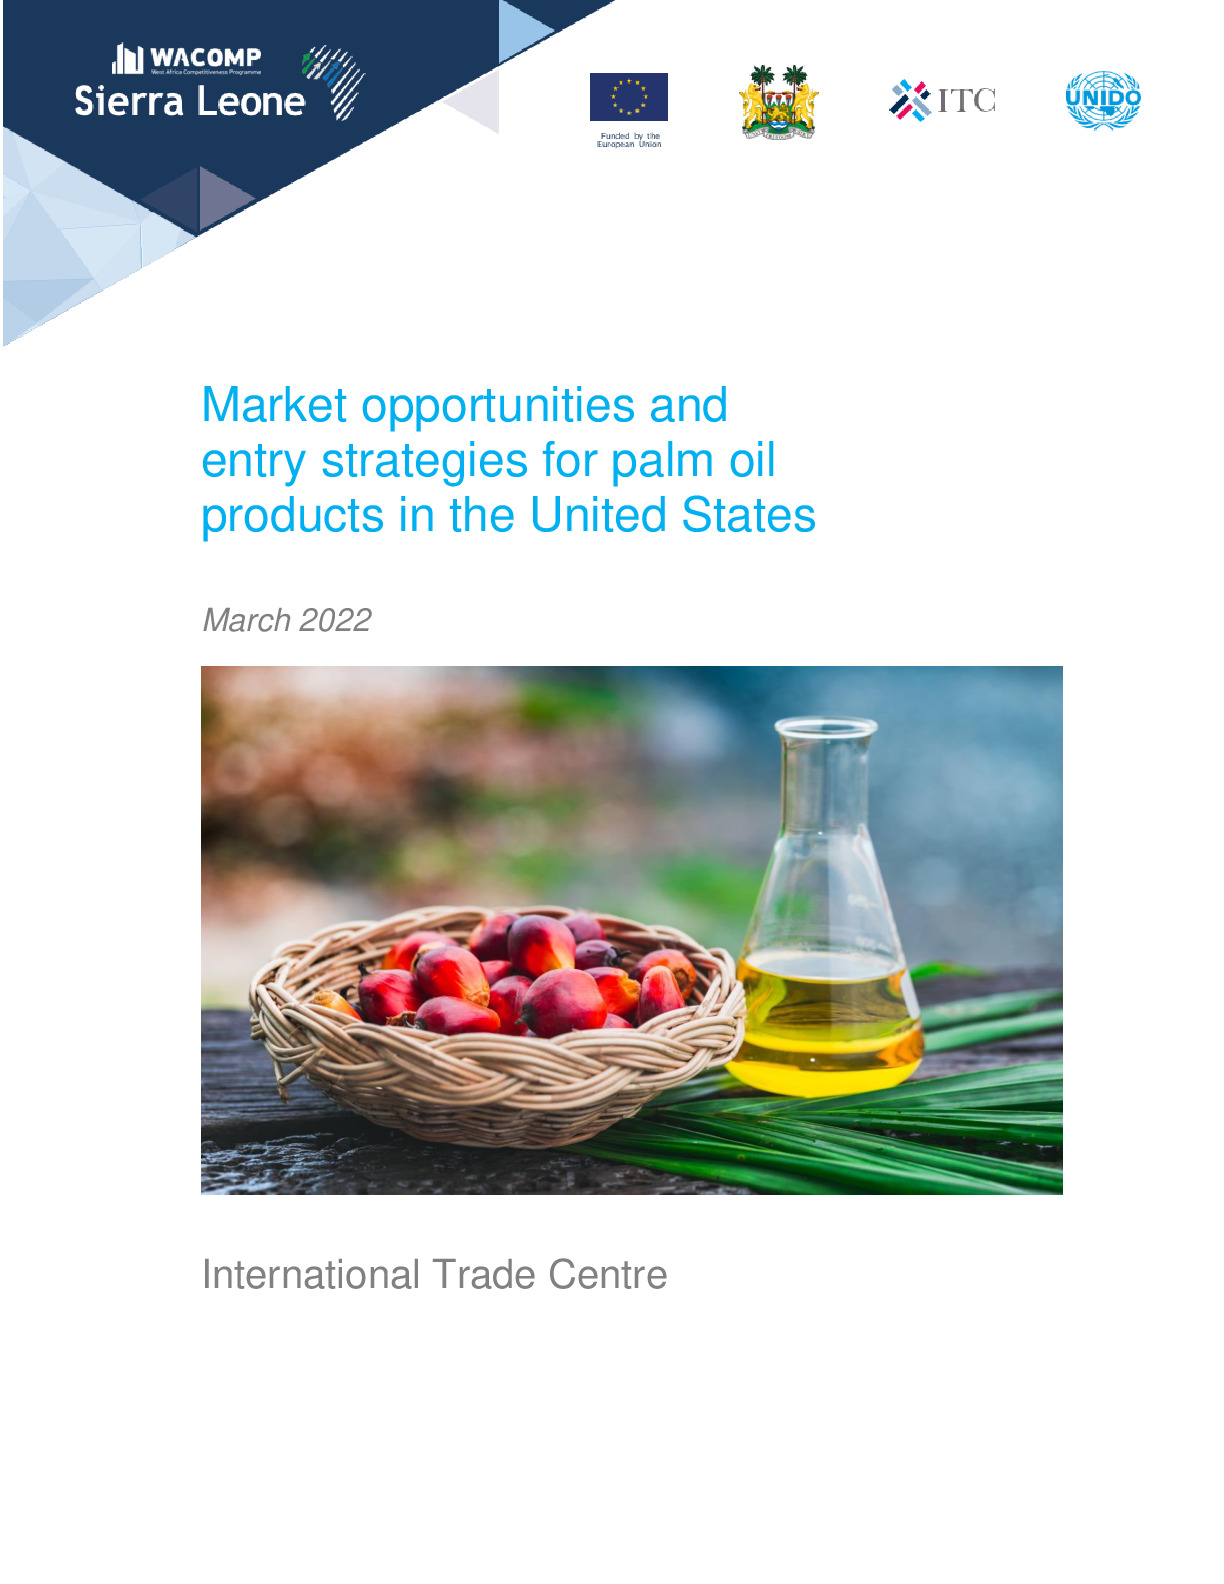 market_opportunities_and_entry_strategies_for_palm_oil_in_the_us_03.2022